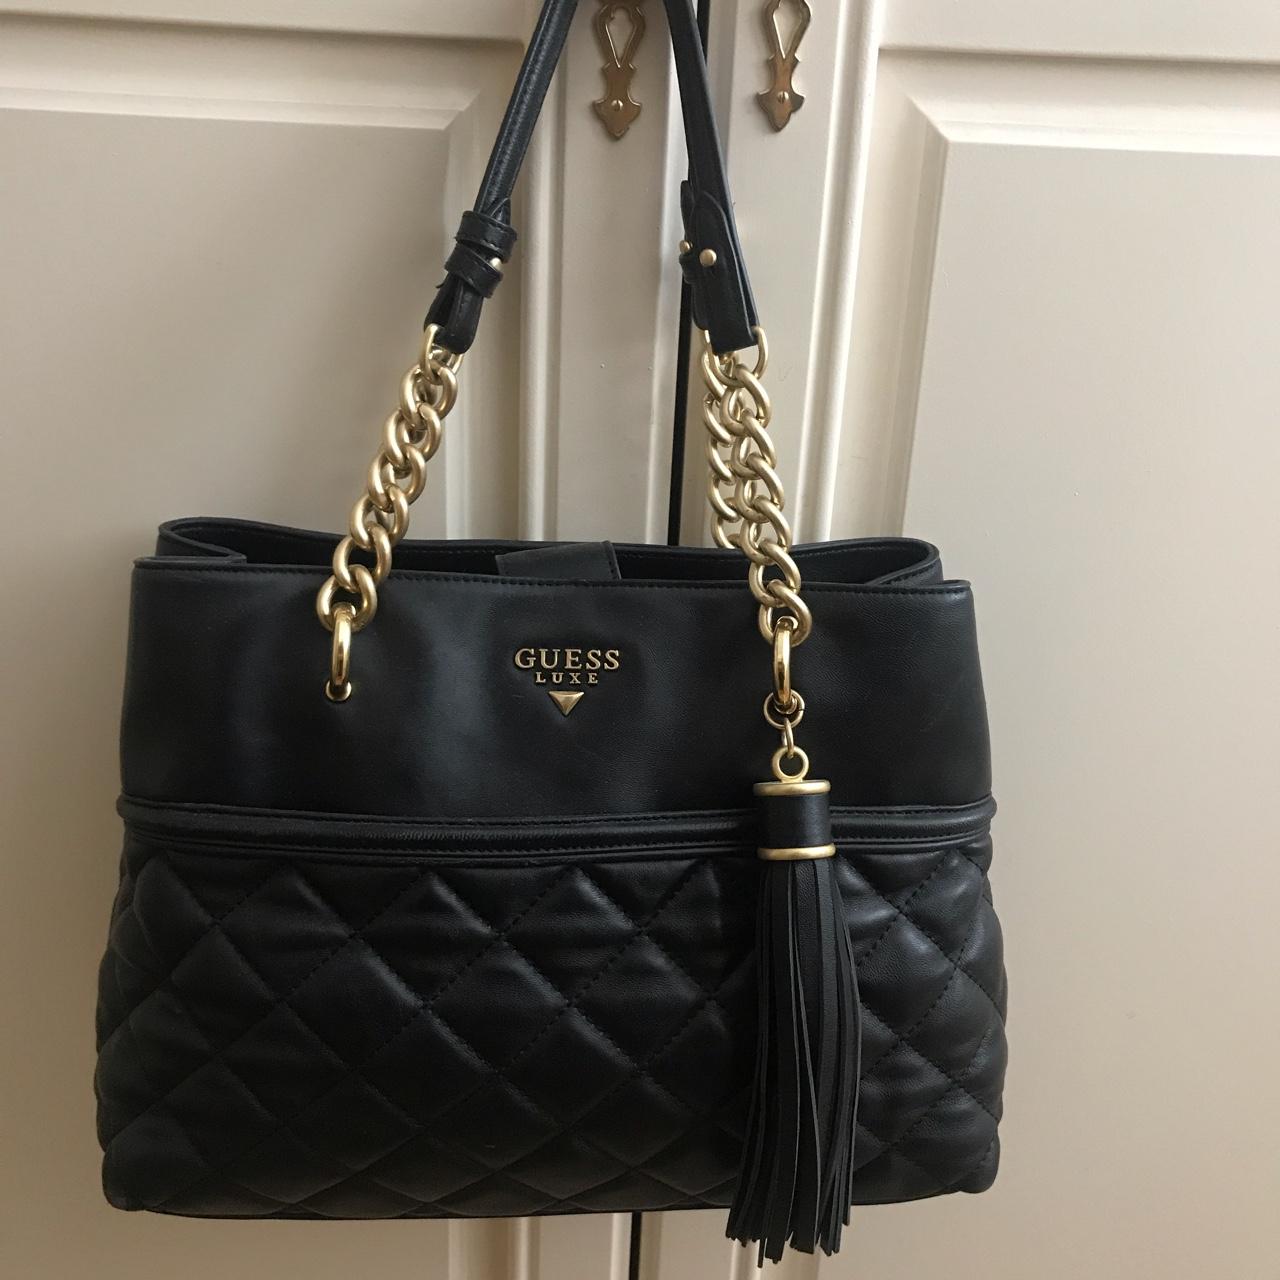 Genuine Guess luxe leather handbag - Vinted